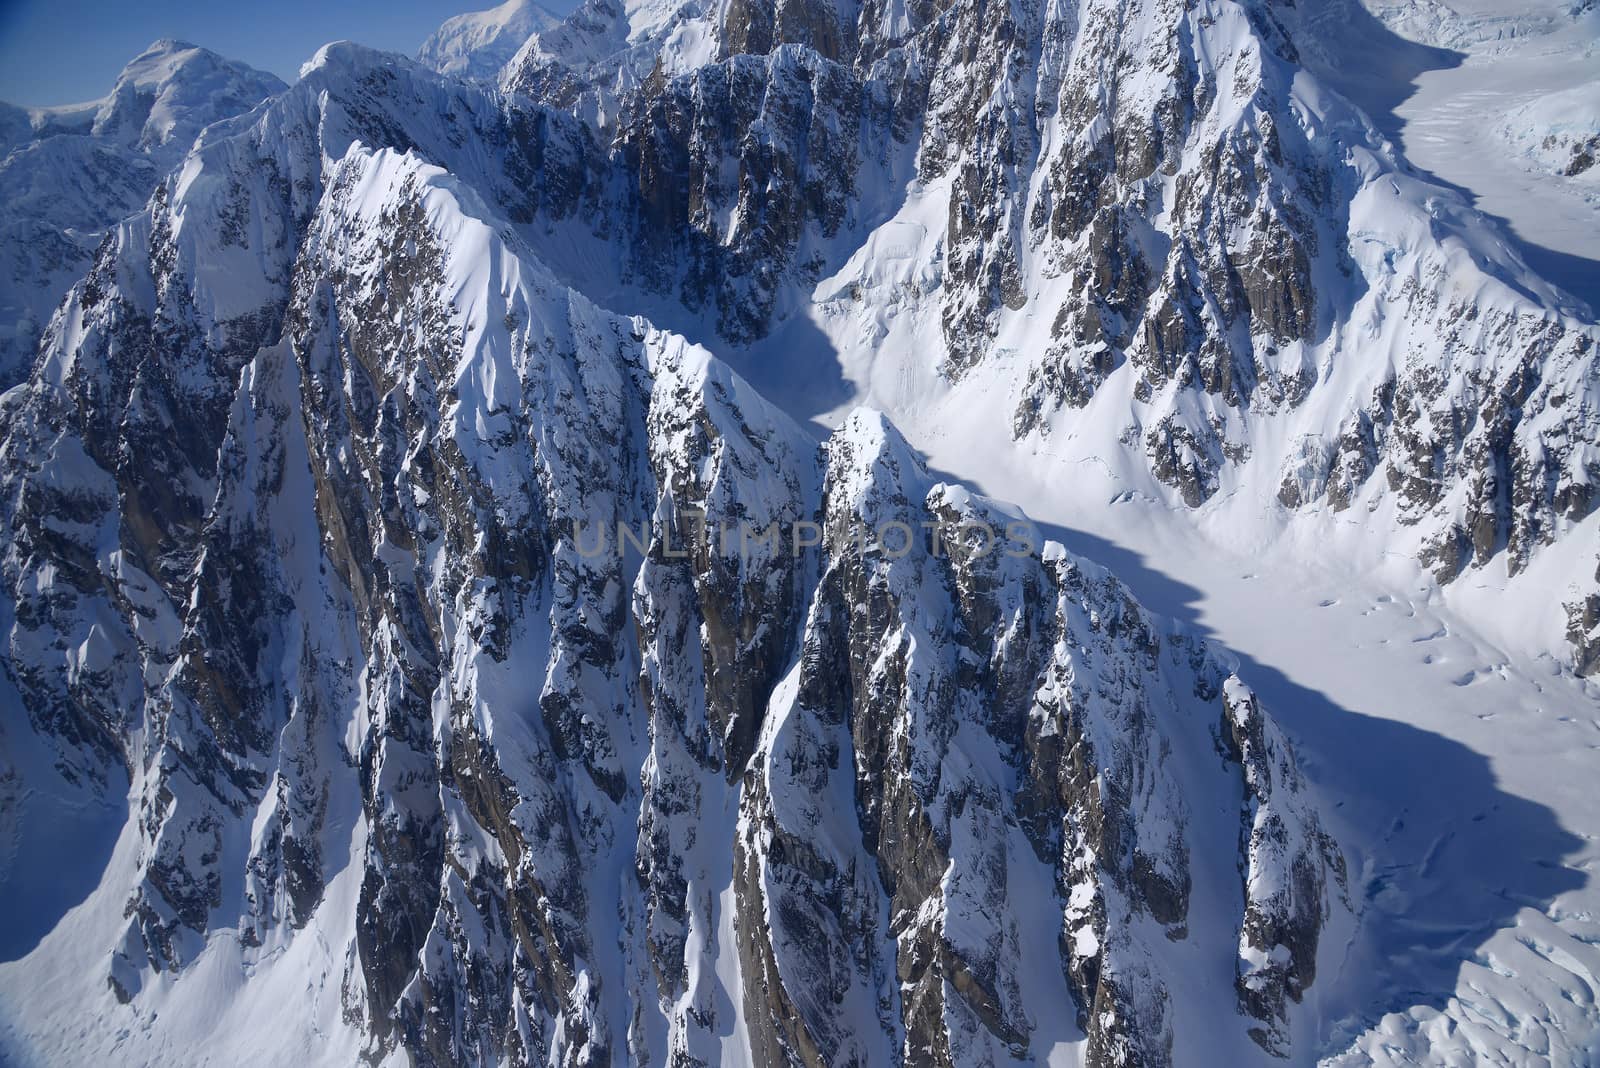 rock cliff on alaska mountain in winter, with snow covered